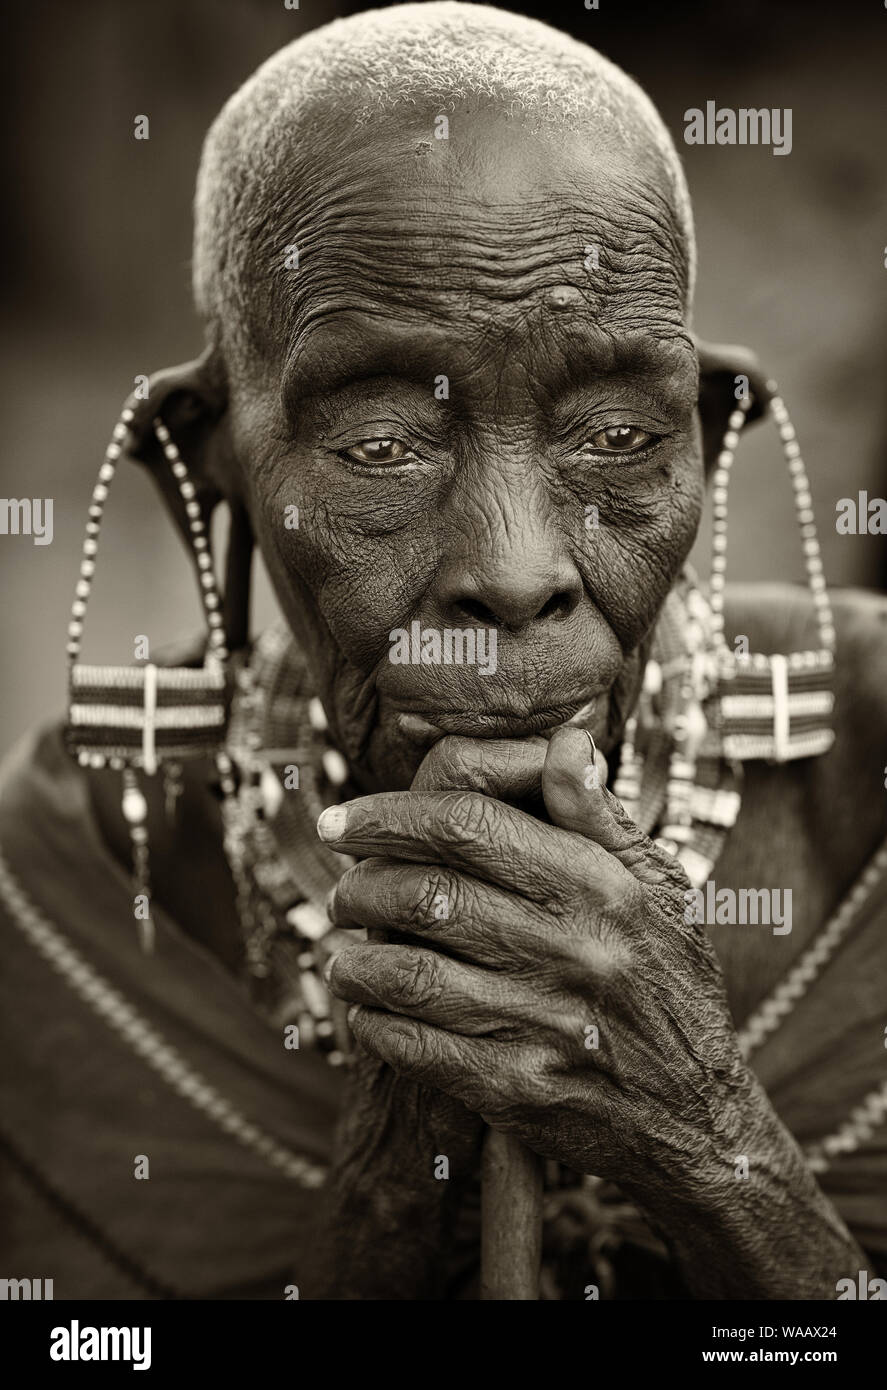 Old Maasai woman with traditional earrings poses for a portrait in Loitoktok, Kenya. Stock Photo